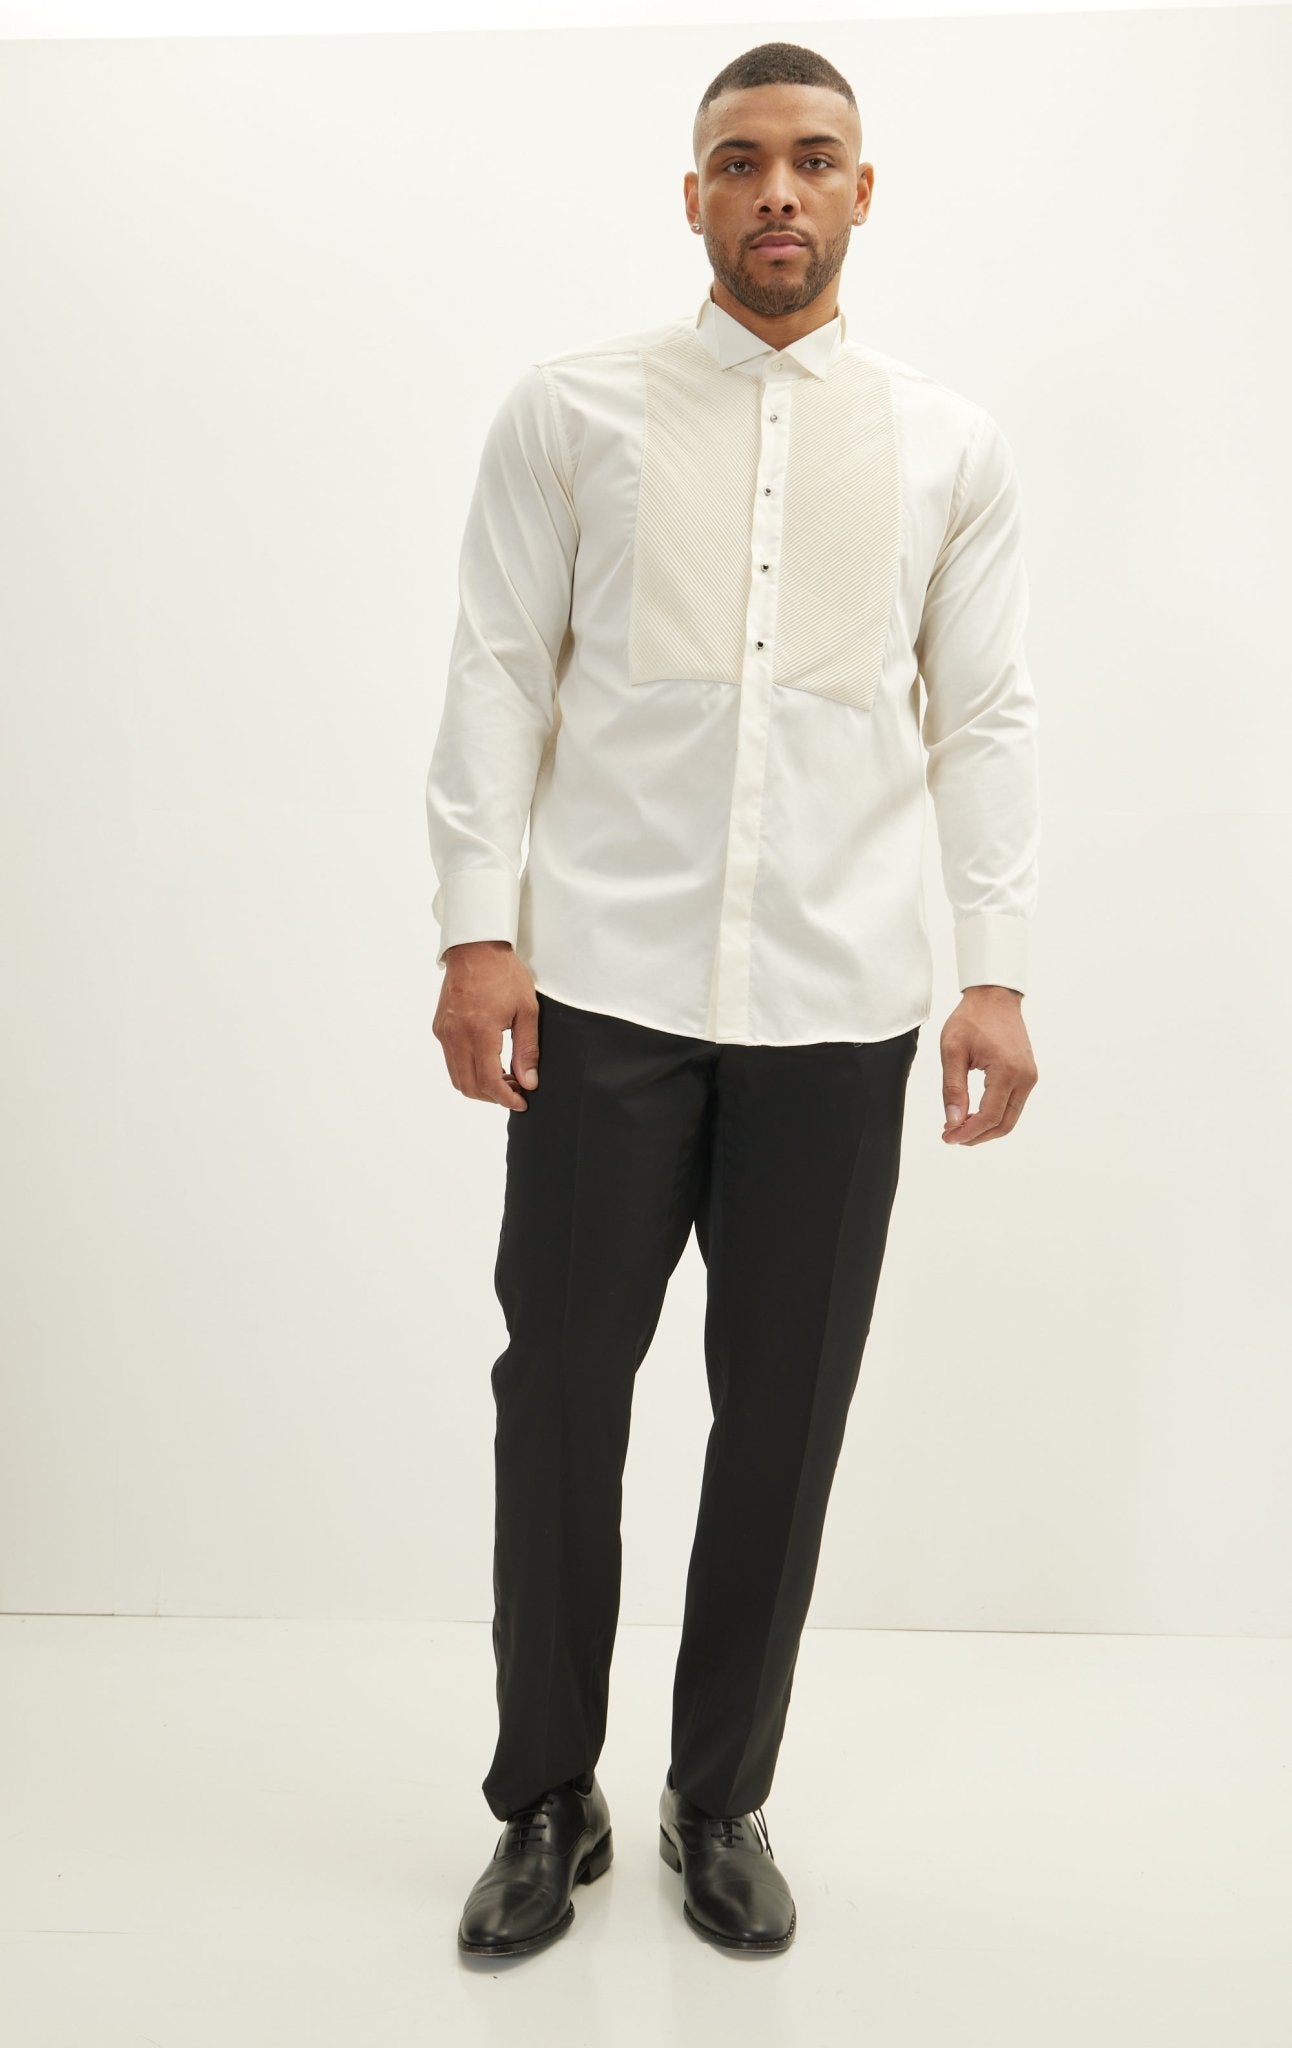 Diagonal Pleated Wing Tip Collar Shirt - Beige - Ron Tomson